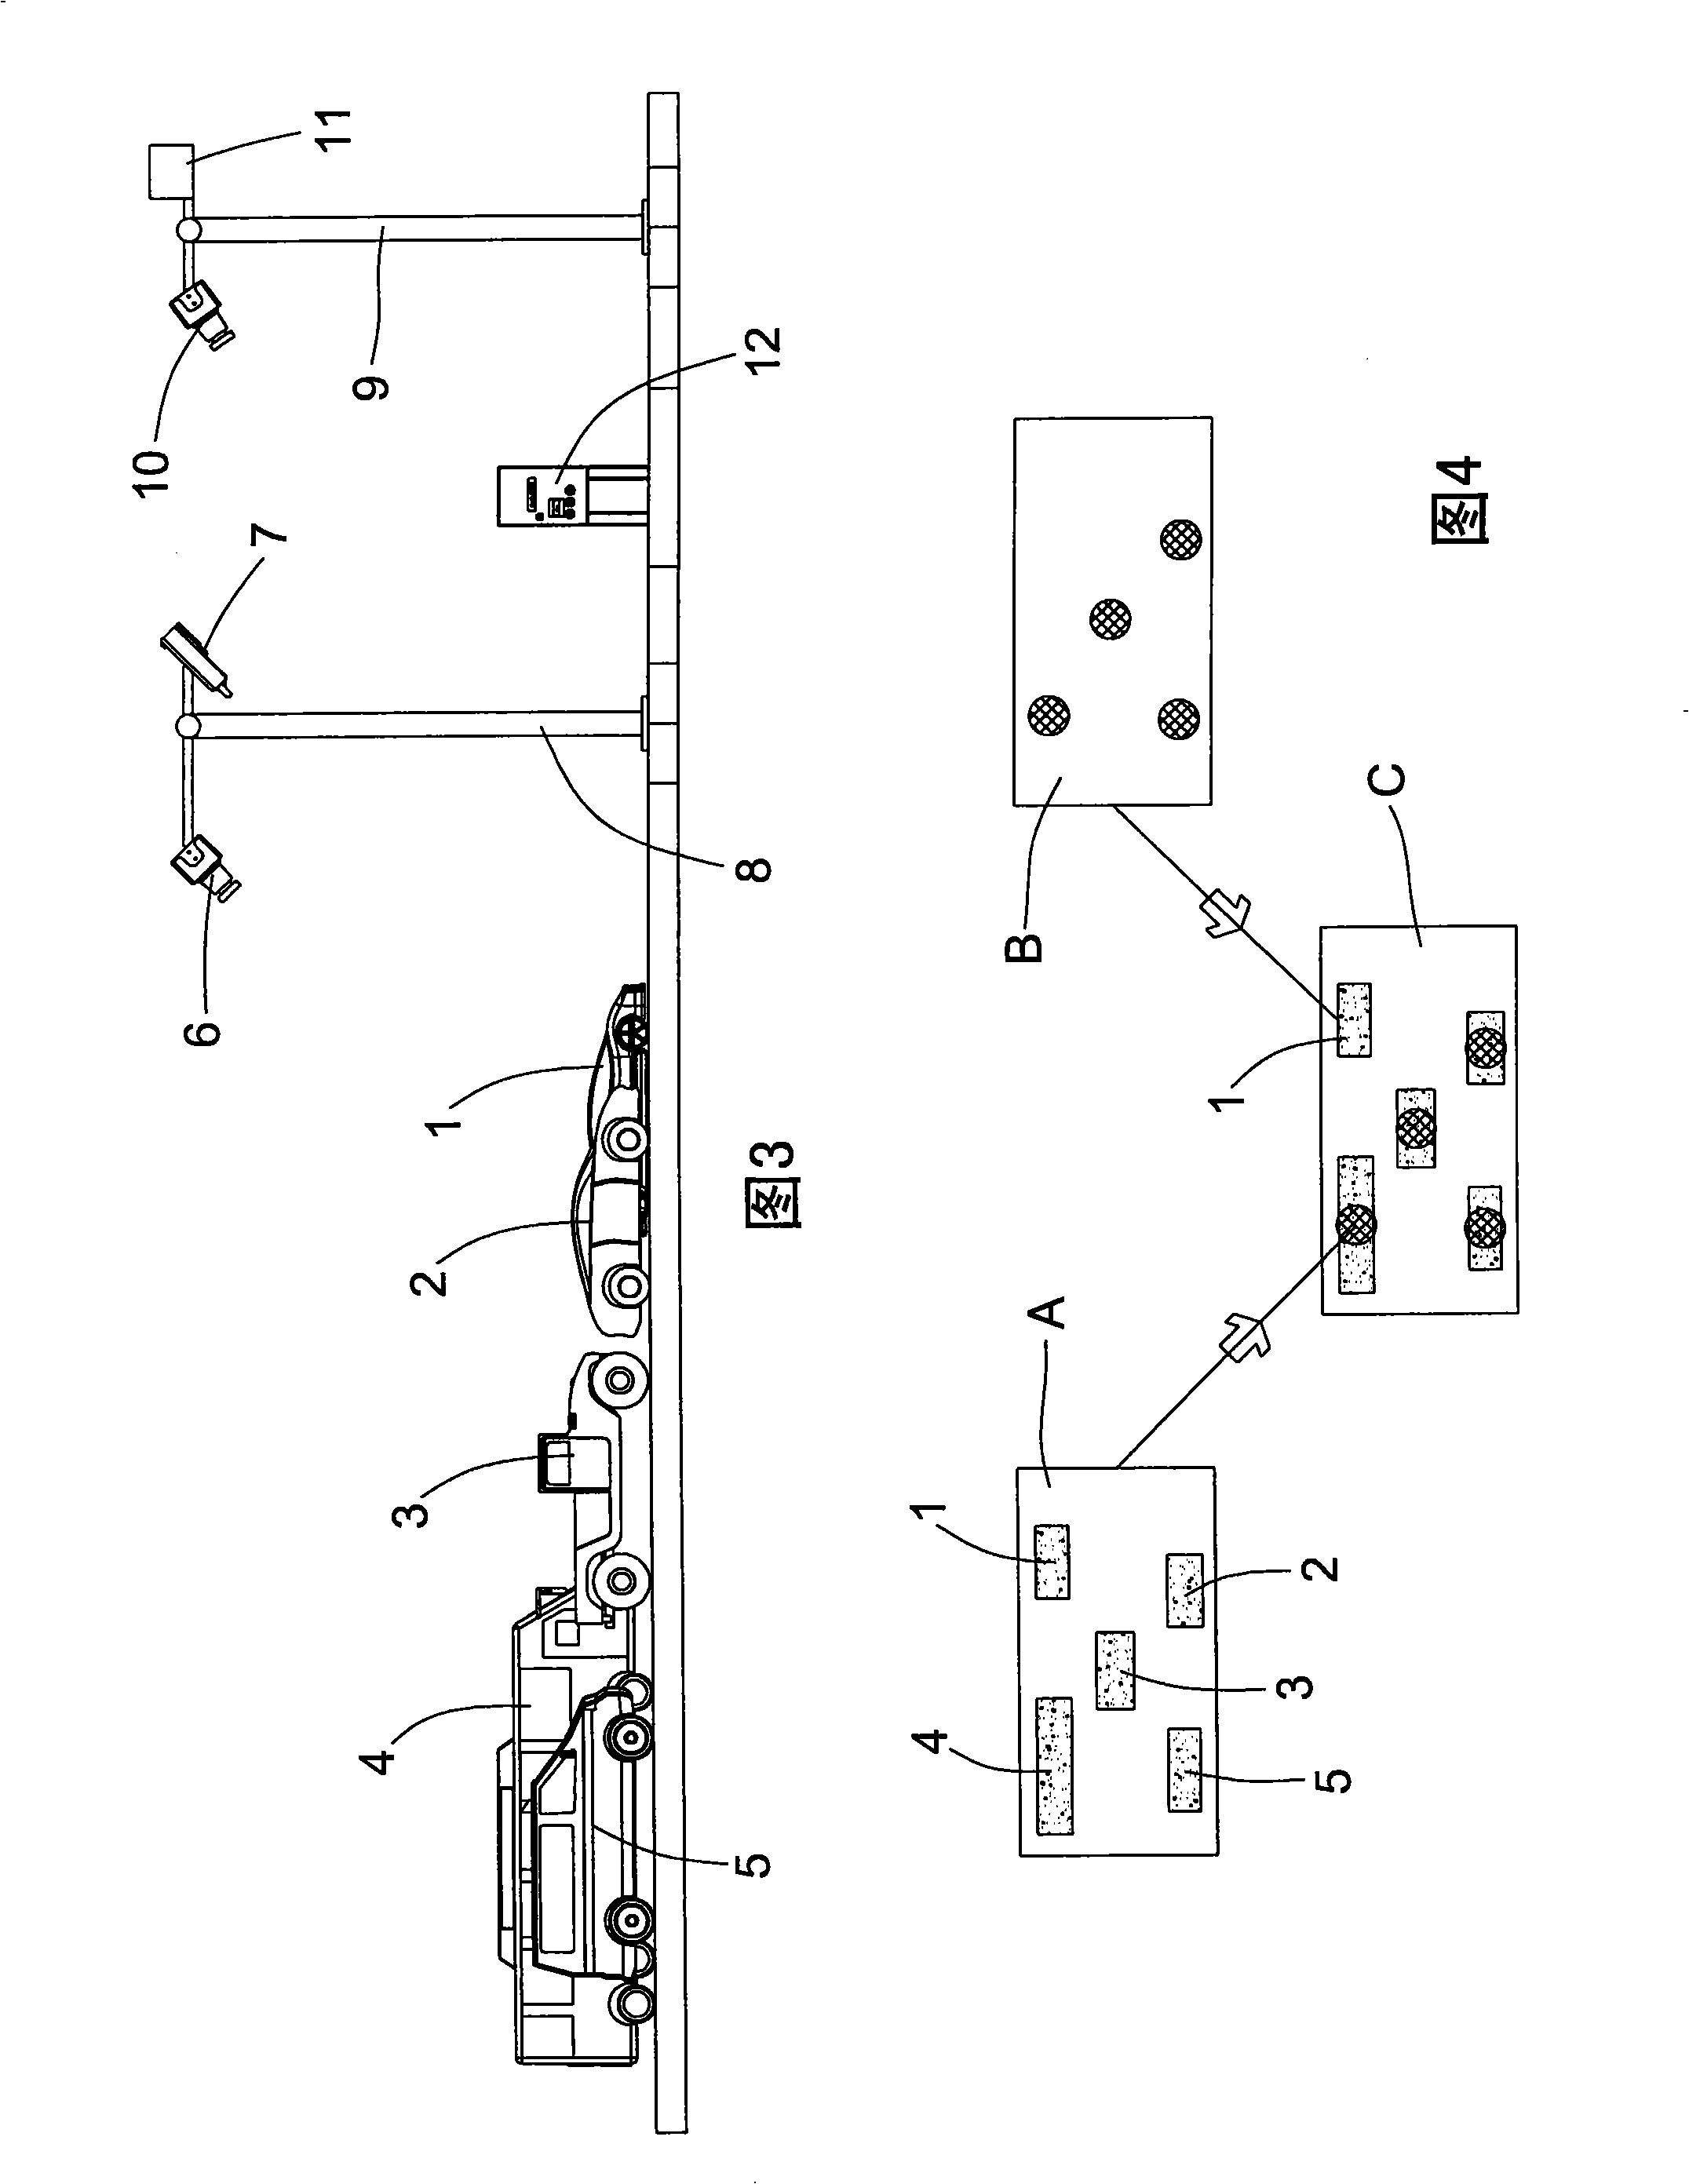 Method for locating and controlling multilane free flow video vehicle